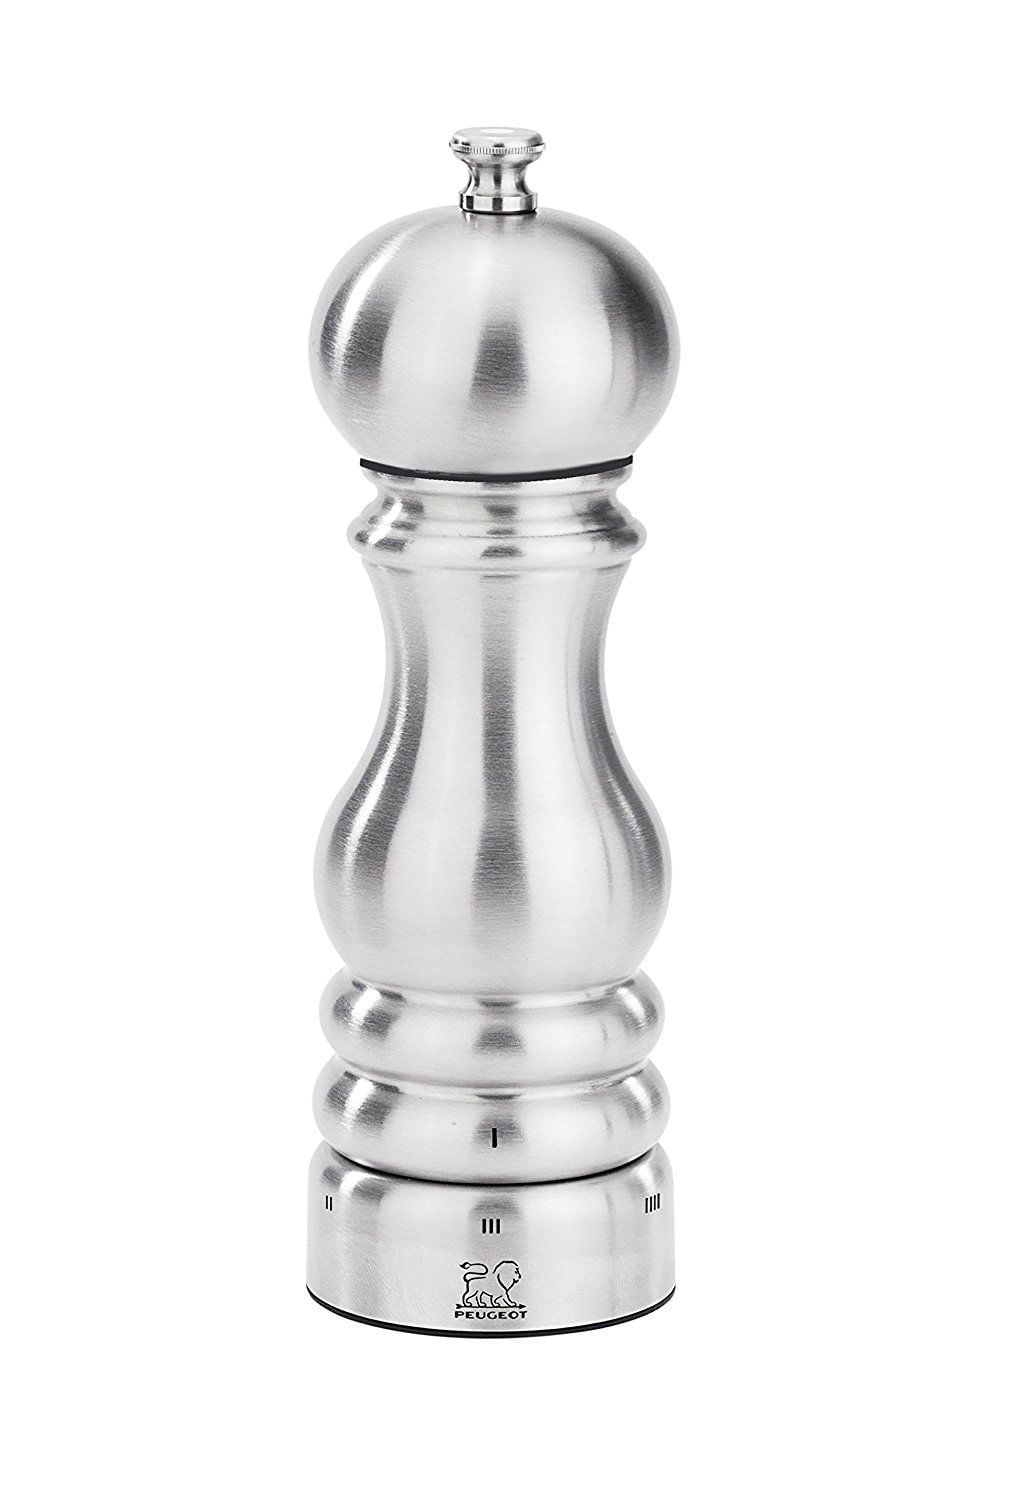 Peugeot 32470 Paris Chef U'select Stainless Steel 18cm 7" Pepper Mill for sale online 